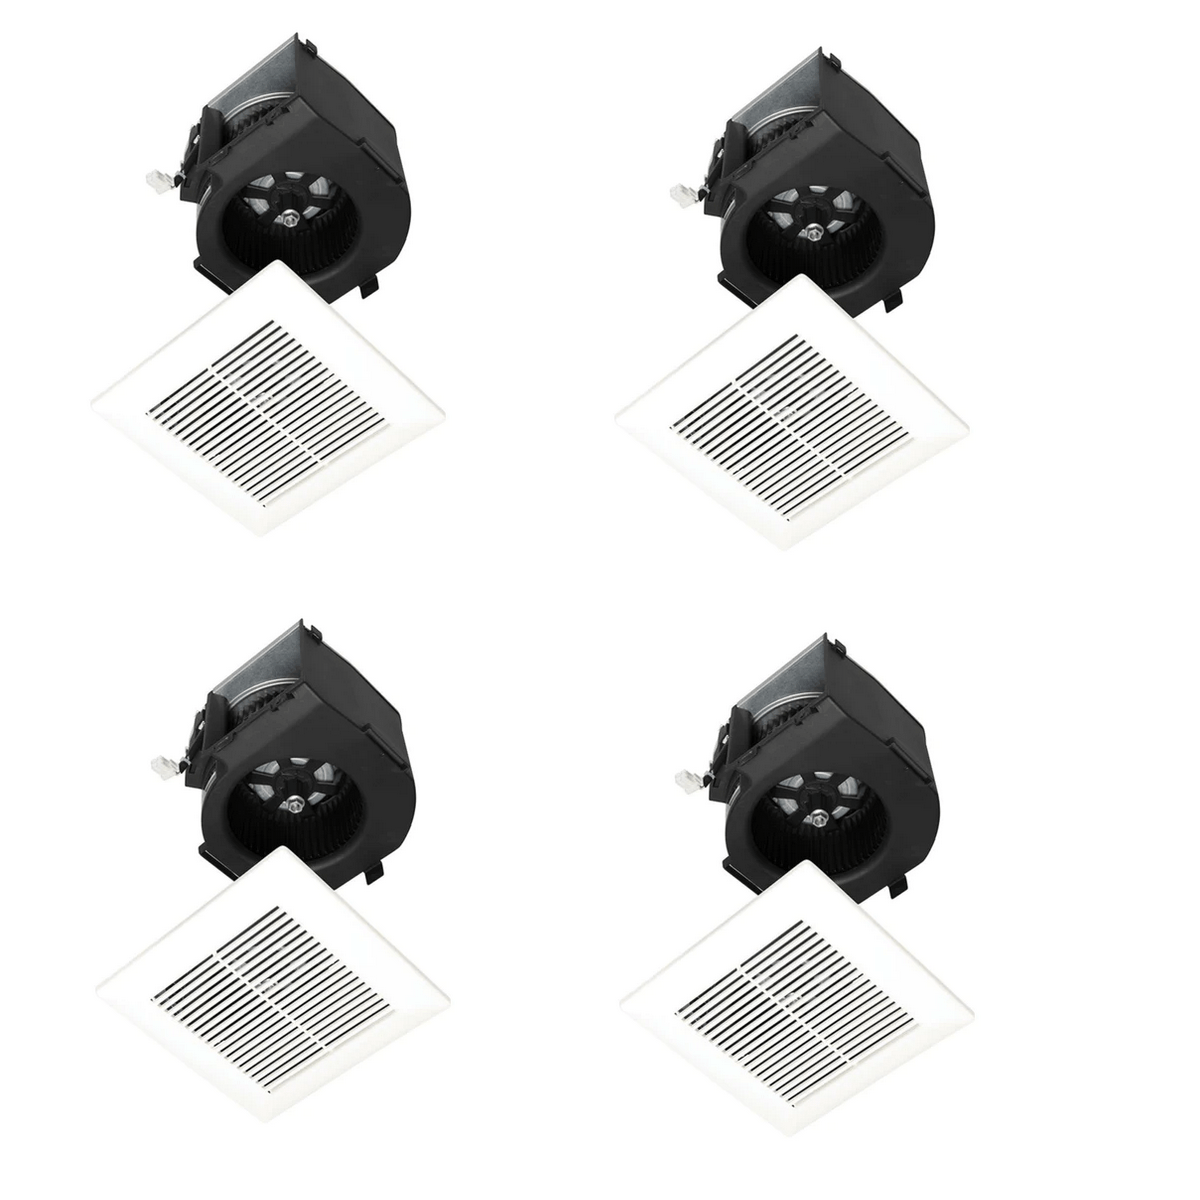 PANASONIC FV-07VBB1 MOTOR AND GRILLE ASSEMBLY FOR ECOVENT FANS - 4 PACK